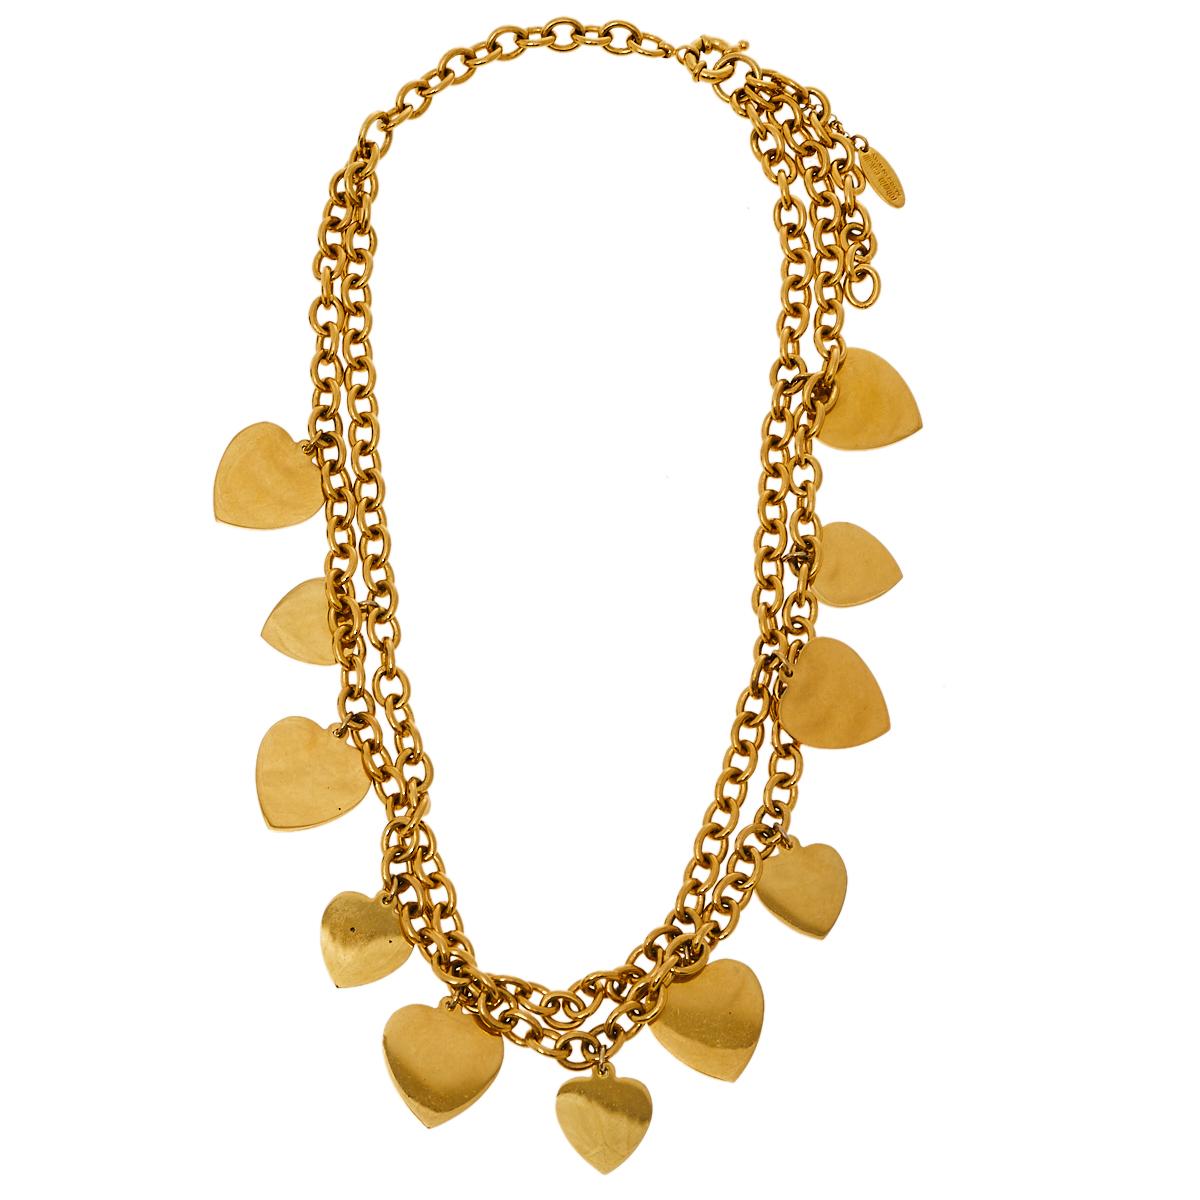 Made out of gold-tone metal, this flawlessly crafted necklace by Roberto Cavalli can be your next prized possession. Featuring a gorgeous array of heart-shaped motifs, the design has been finished with the brand's nameplate and a spring-ring clasp.